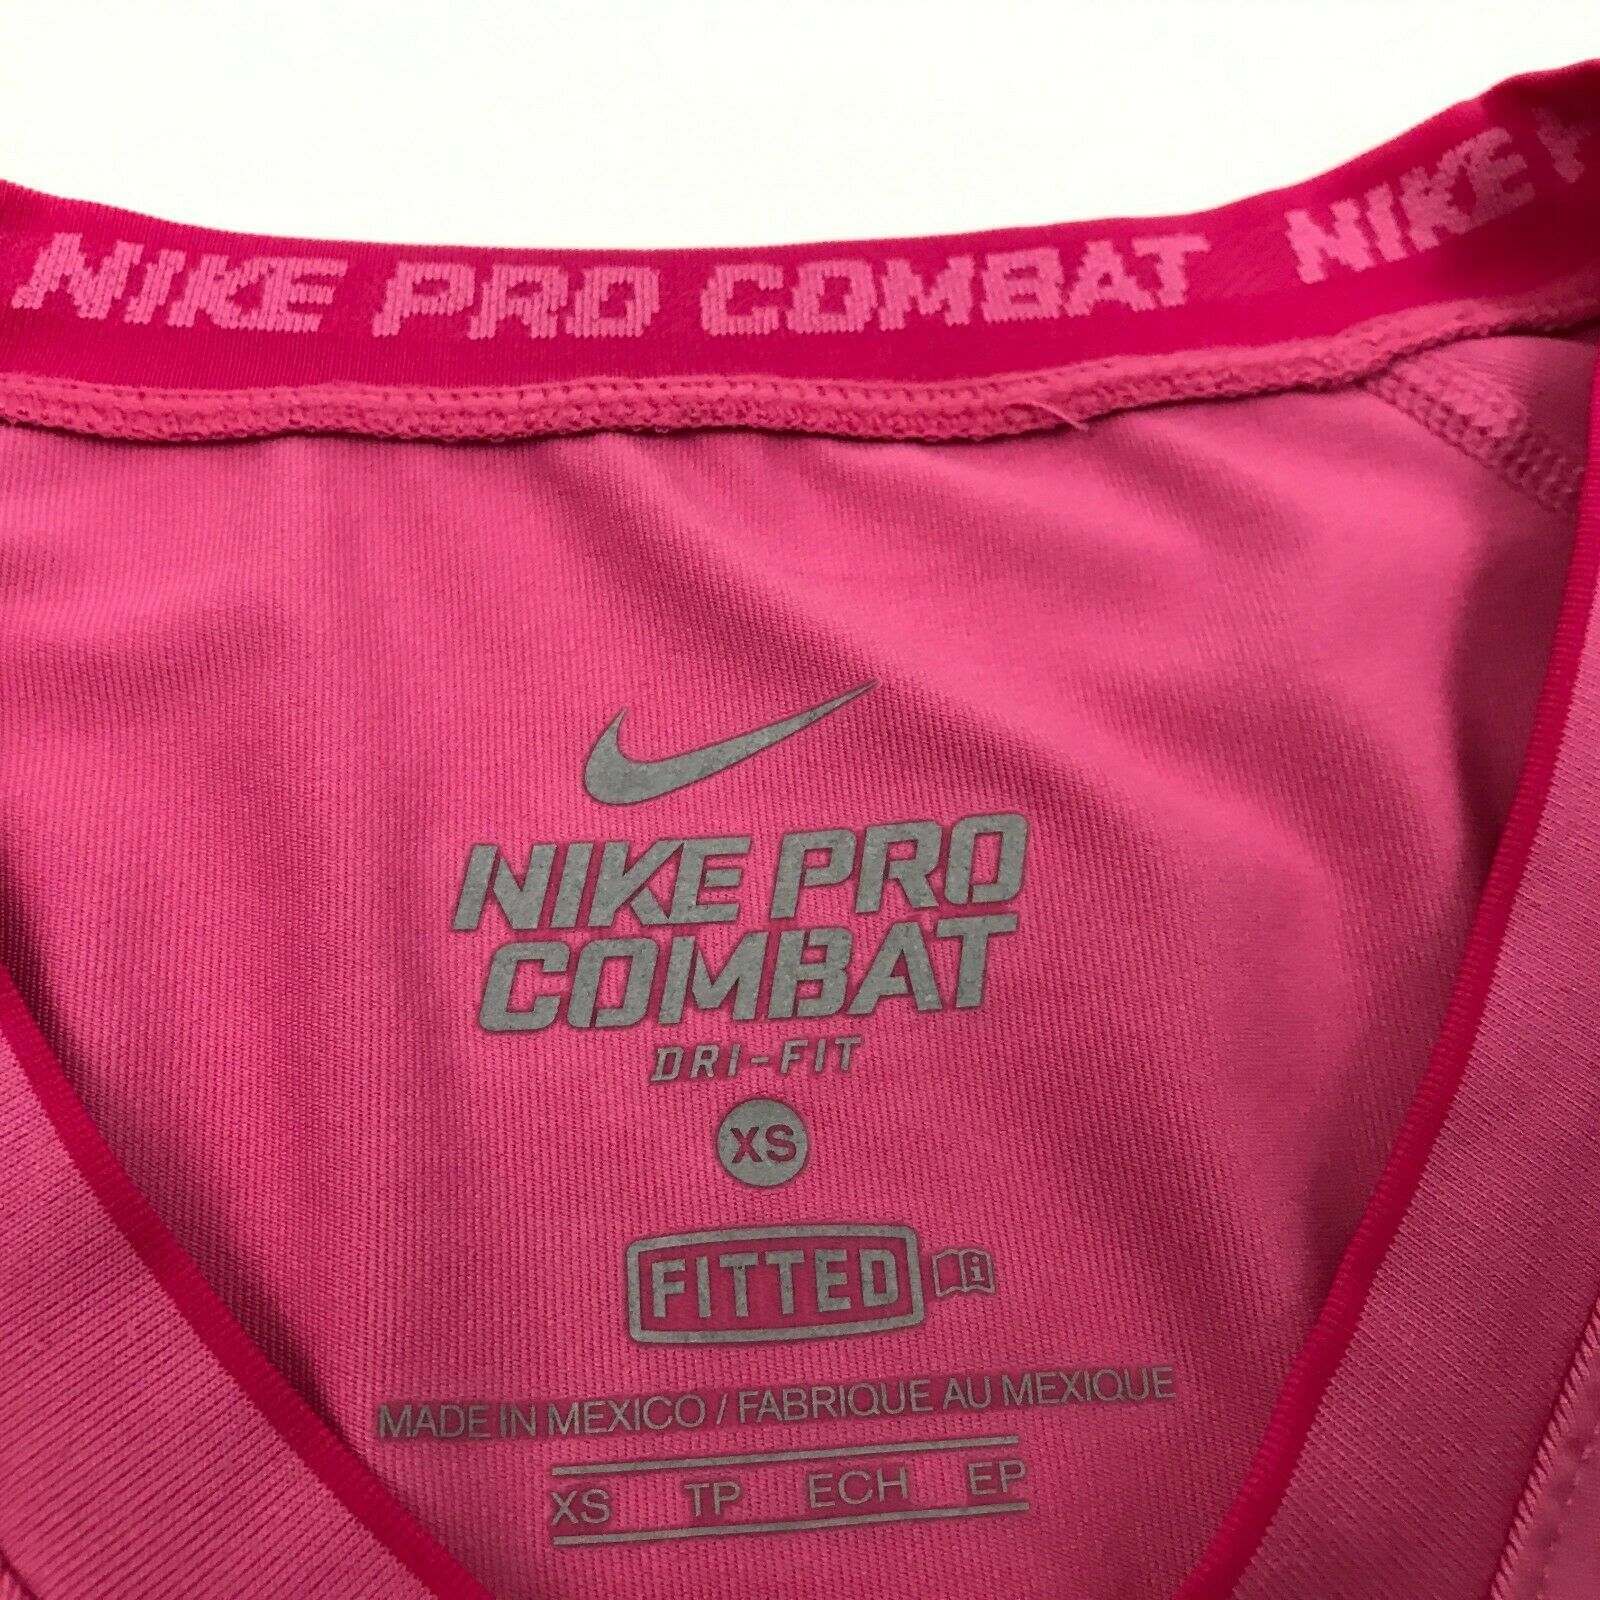 NIKE PRO COMBAT Womens Pink Long Sleeve FITTED Pink V-neck Swoosh Logo ...